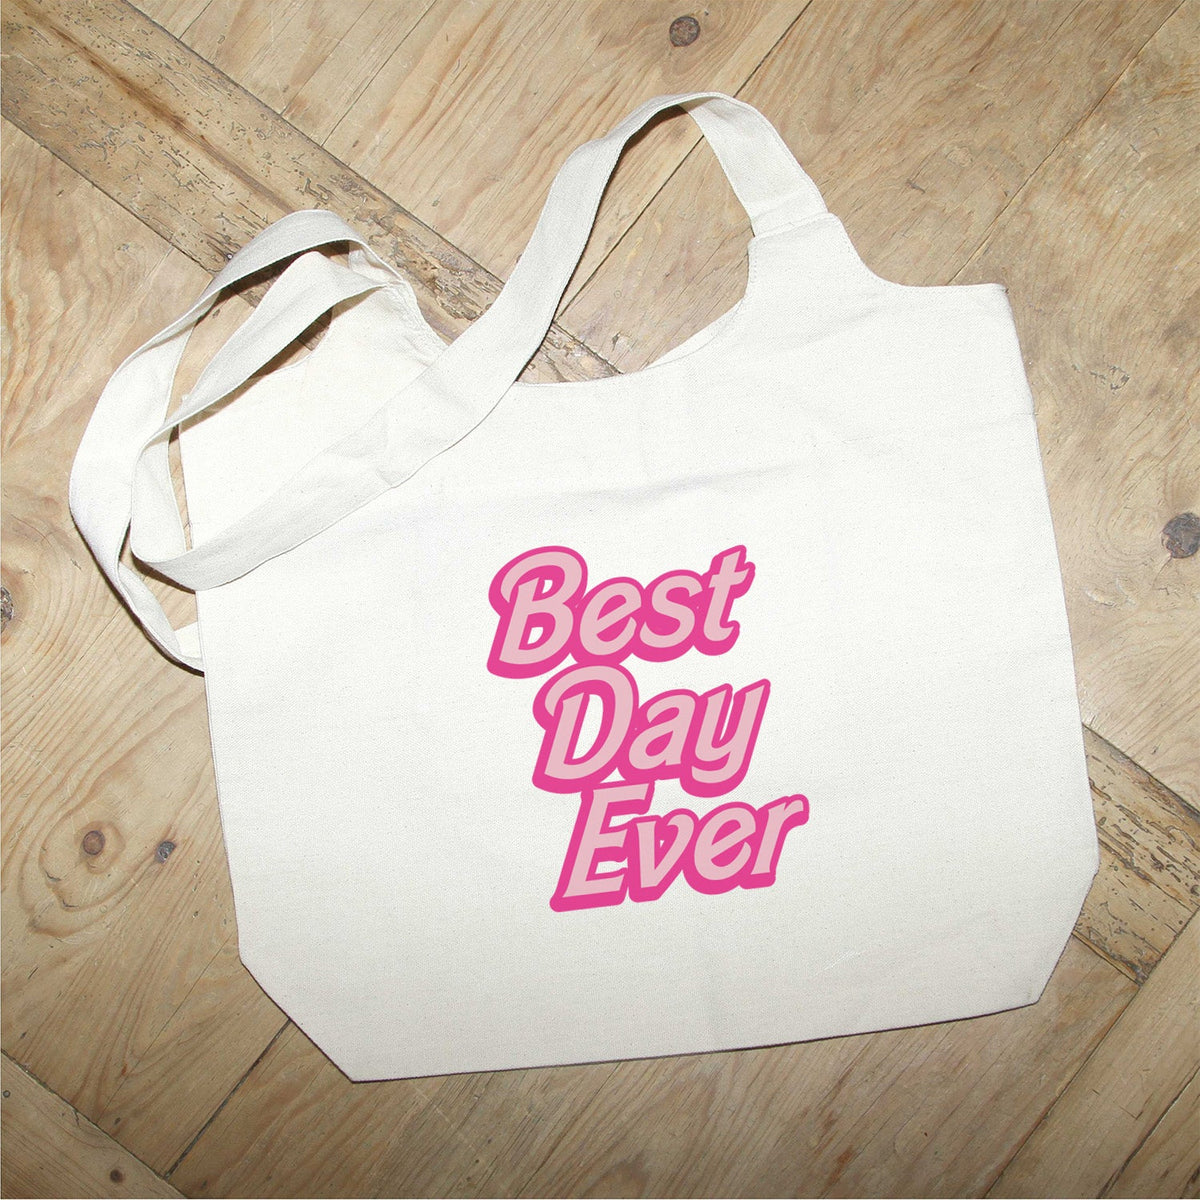 Best Day Ever / Trend Natural Tote Bag